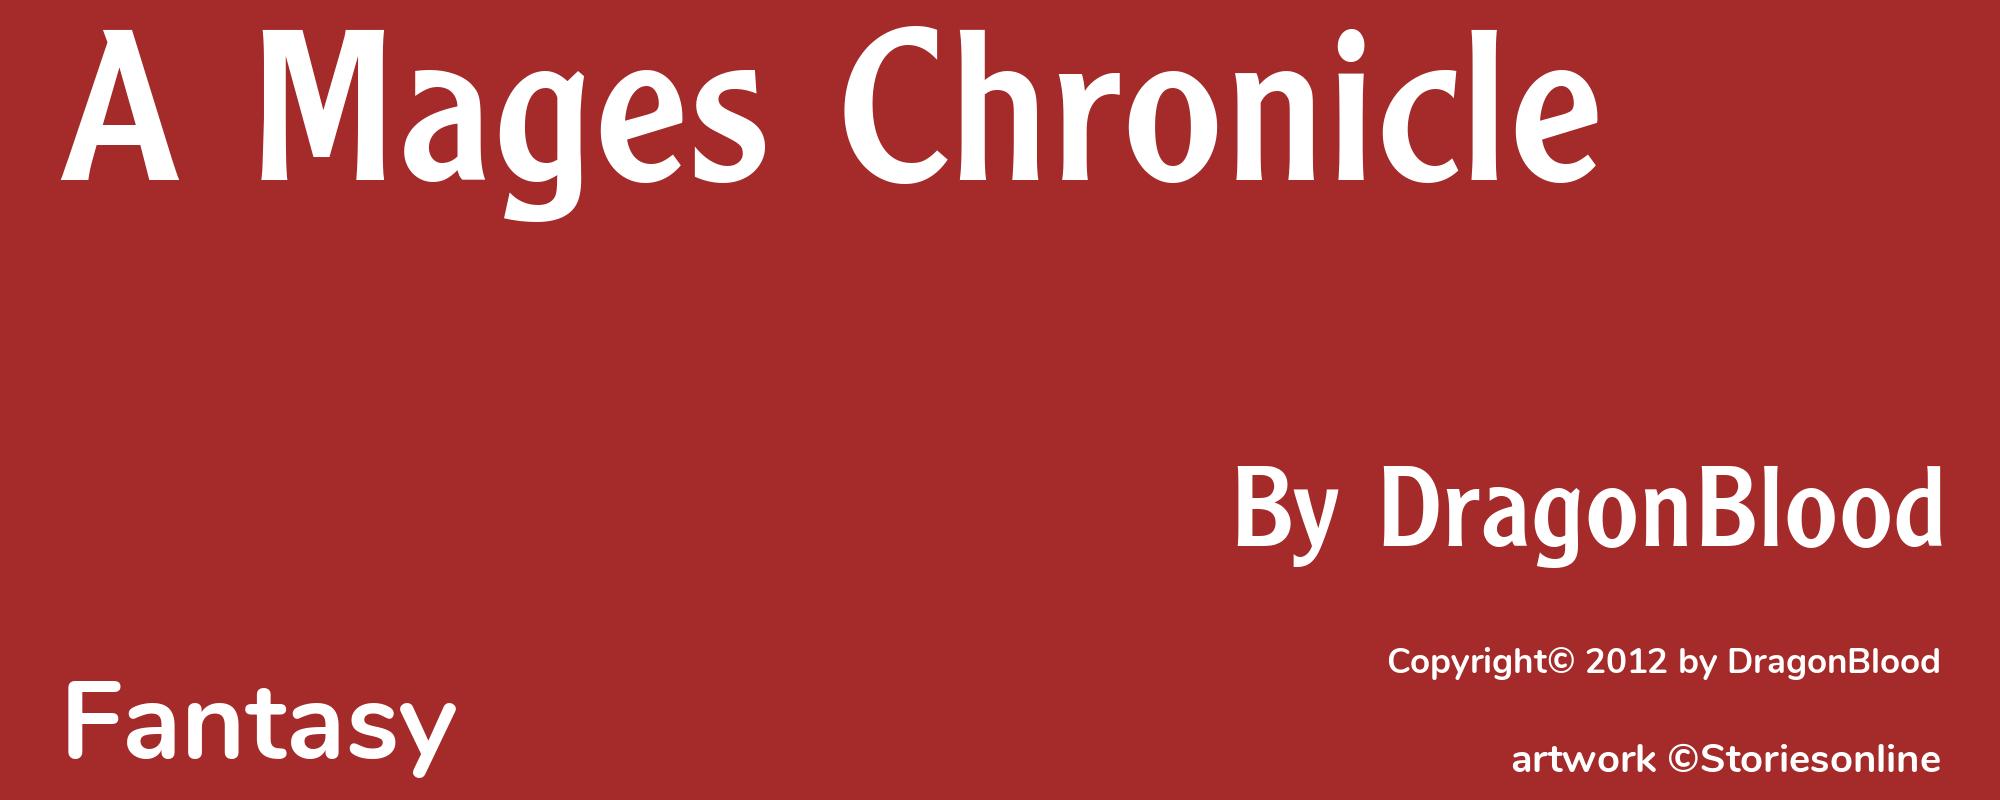 A Mages Chronicle - Cover